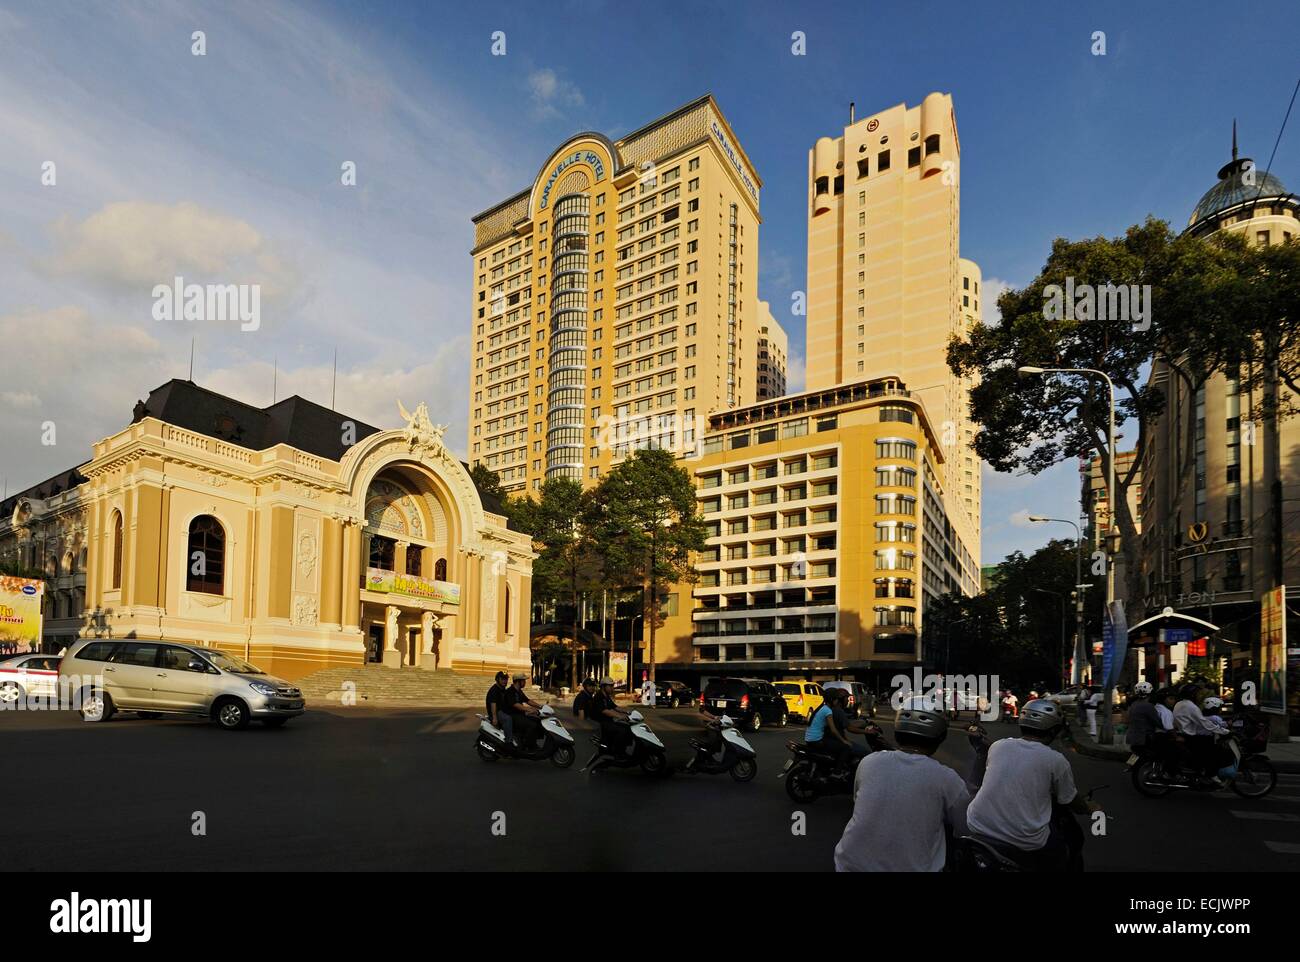 Vietnam, Ho Chi Minh Ville, district 1, Opera house or city theater, built in 1900 by the french, inspired by the Petit Palais of Paris, french colonial style architecture and in the background the Caravelle hotel Stock Photo